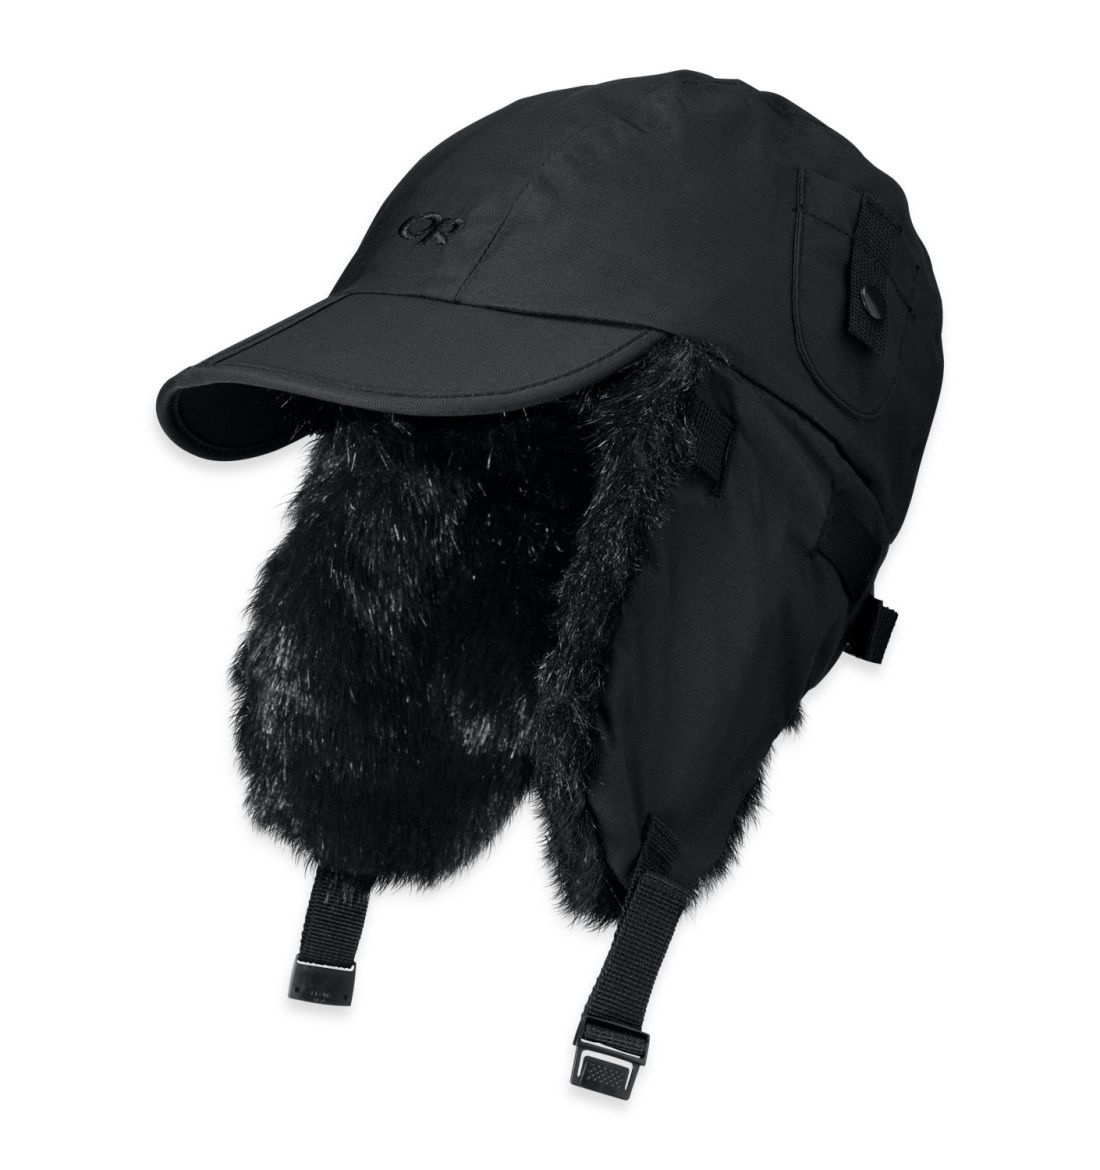 Outdoor research Зимняя шапка с мехом Outdoor Research Trapper Hat